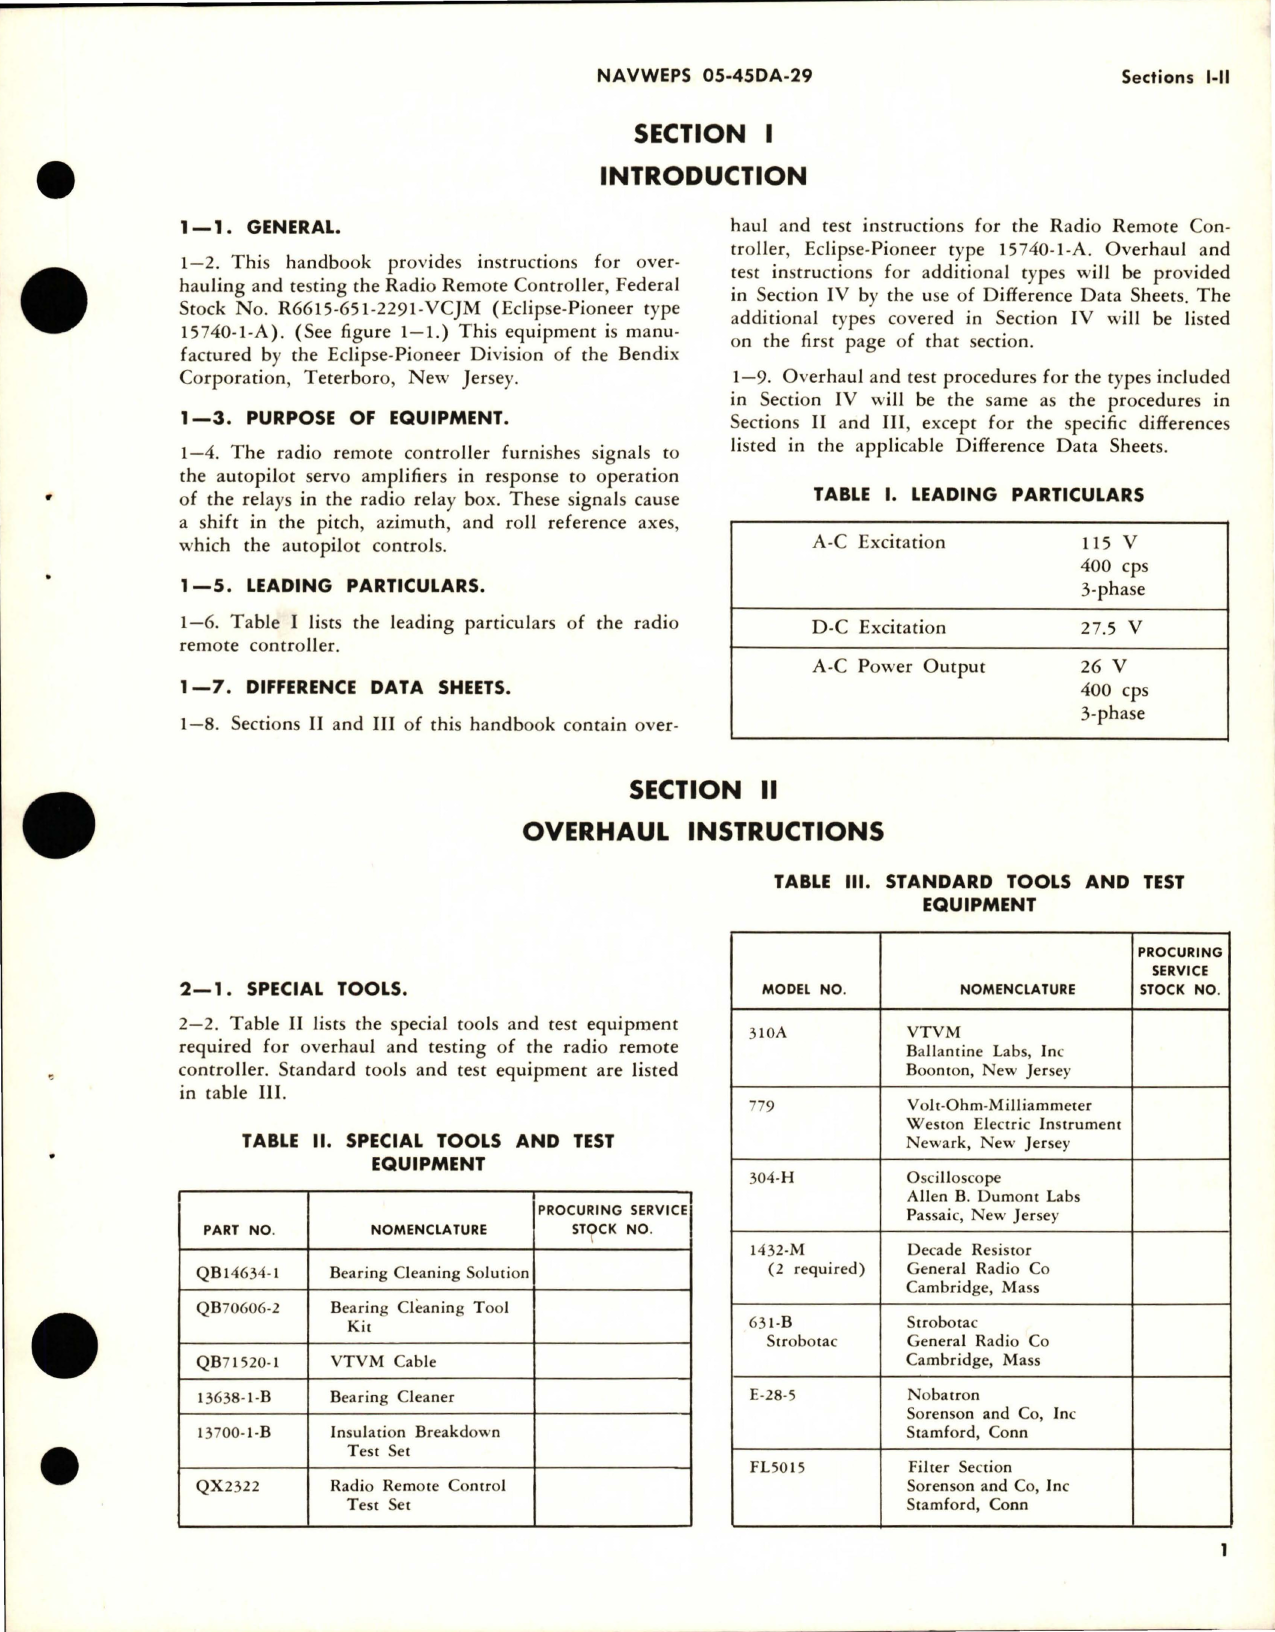 Sample page 5 from AirCorps Library document: Overhaul Instructions for Radio Remote Controller - Part 15740-1-A